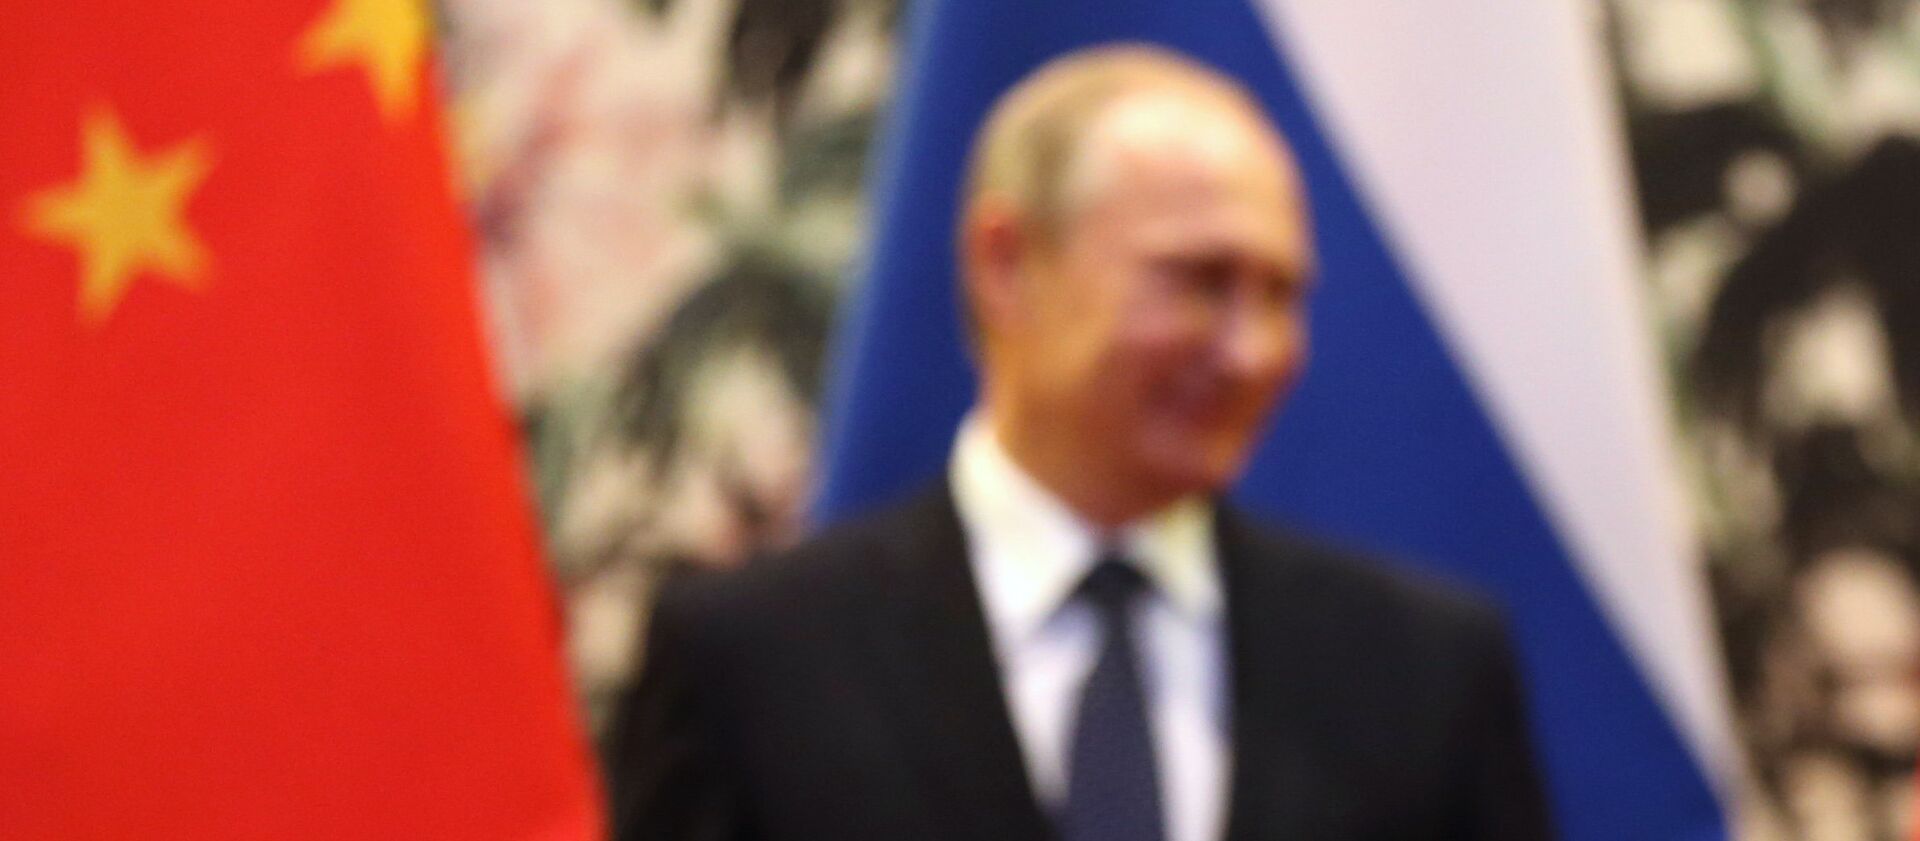 The Russian and Chinese national flags are seen on the table as Russia's President Vladimir Putin (back L) and his China's President Xi Jinping (back R) stand during a signing ceremony at the Diaoyutai State Guesthouse in Beijing on November 9, 2014. - Sputnik International, 1920, 14.01.2020